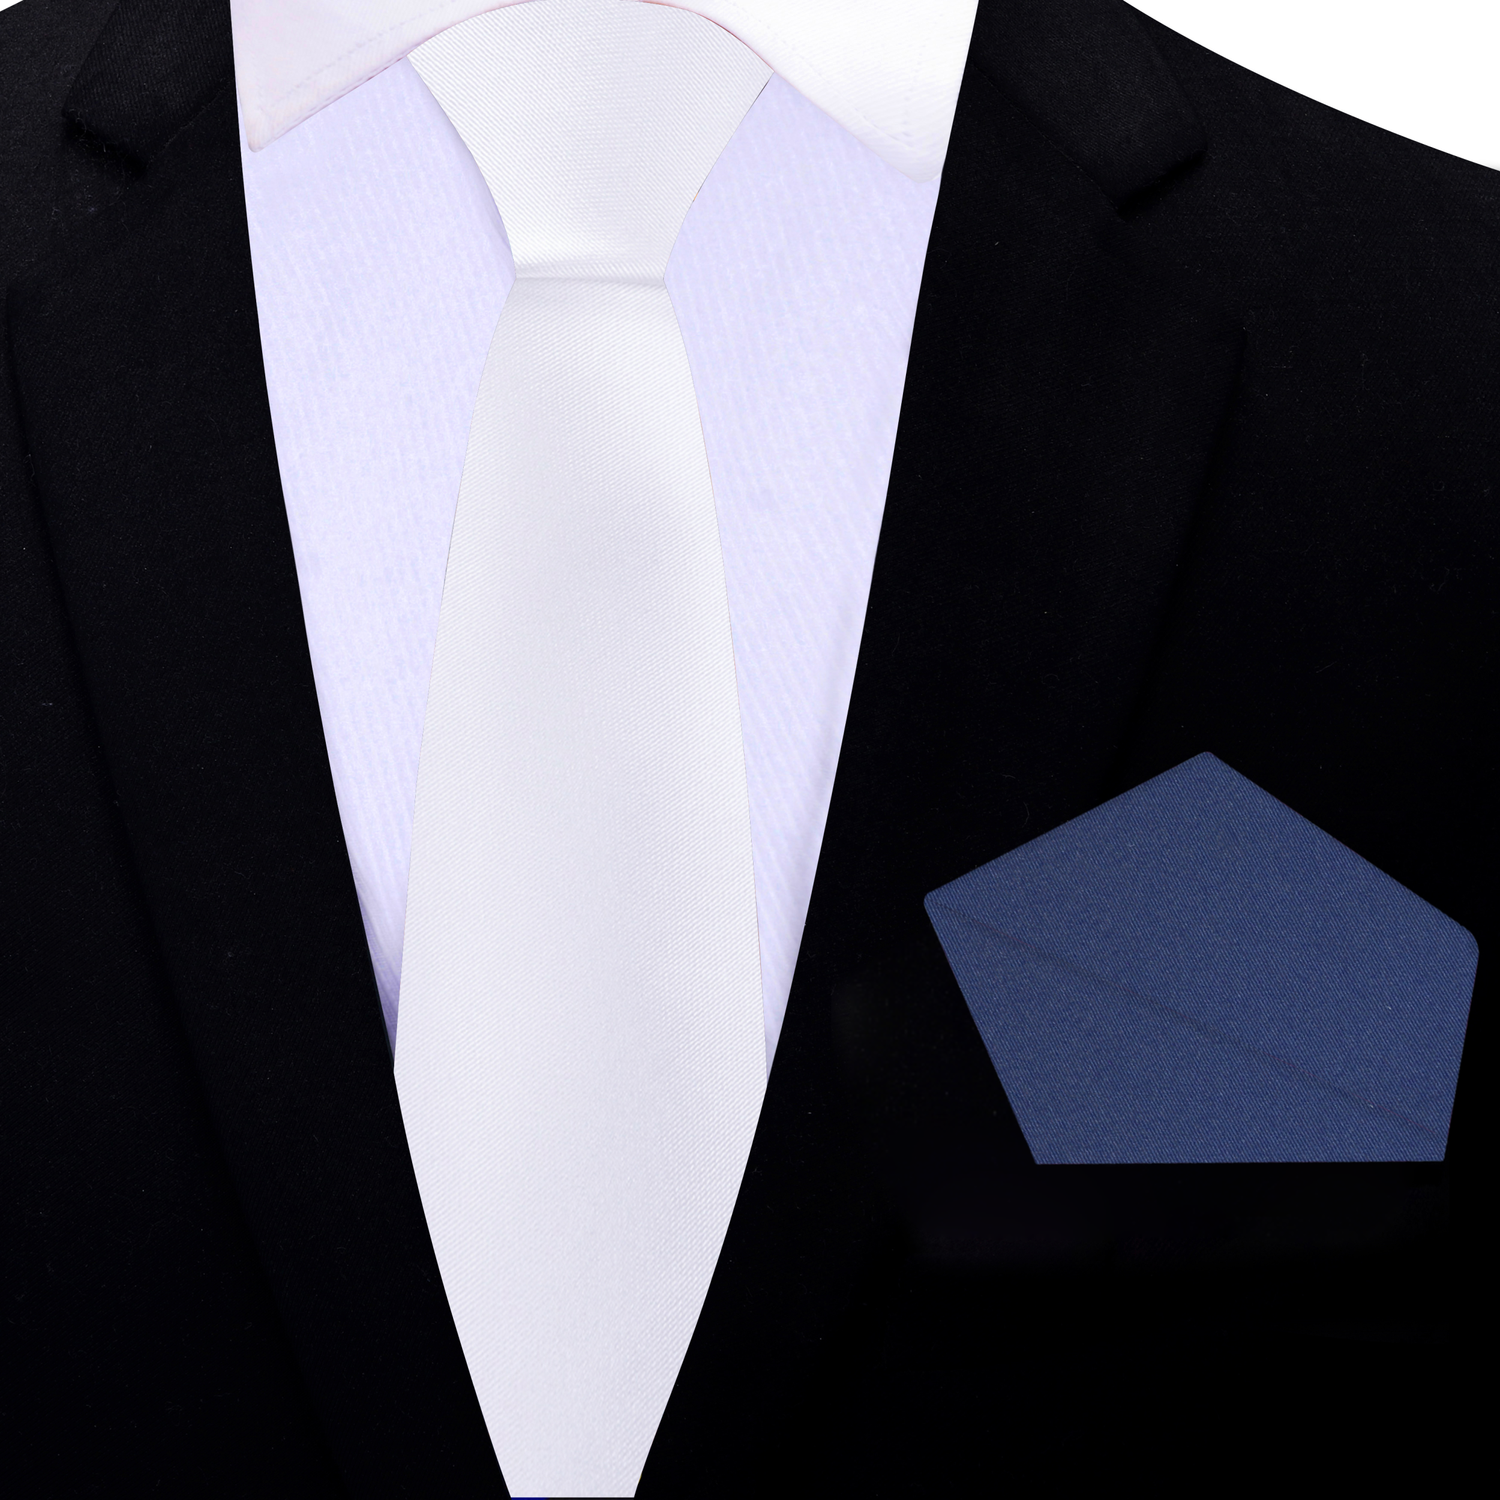 Thin Tie: Solid White Tie with Blue Square